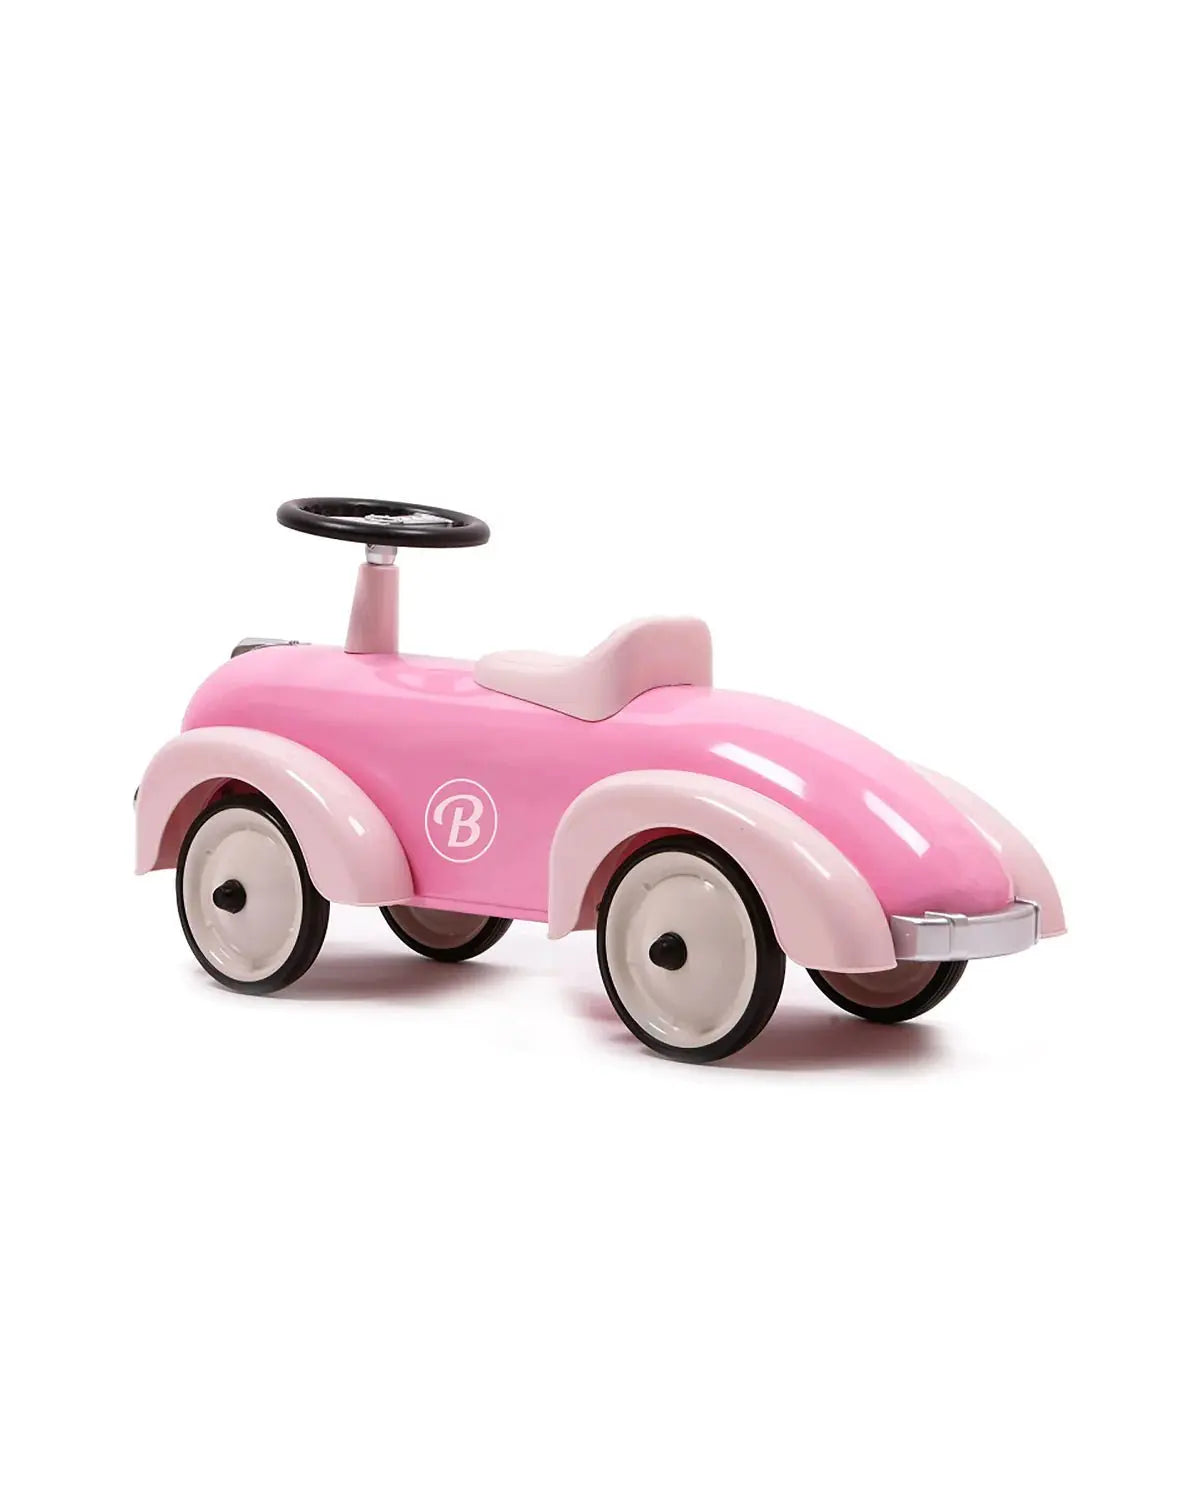 Kids Ride-on Speedster Car, Classic Play Vehicle for Children  Baghera Pink  